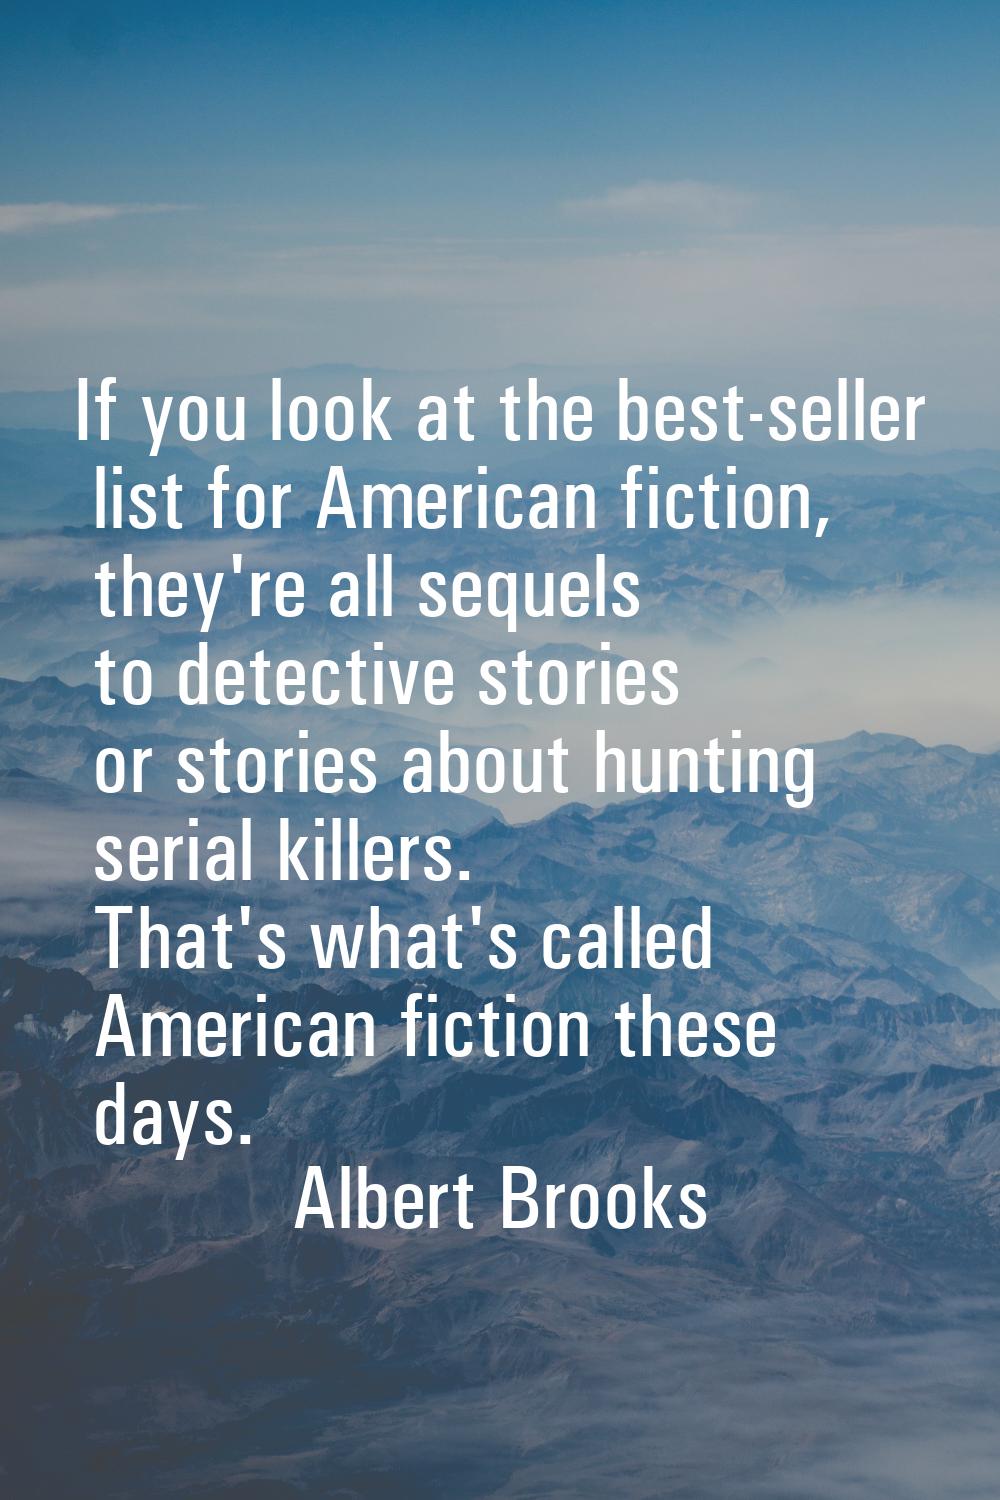 If you look at the best-seller list for American fiction, they're all sequels to detective stories 